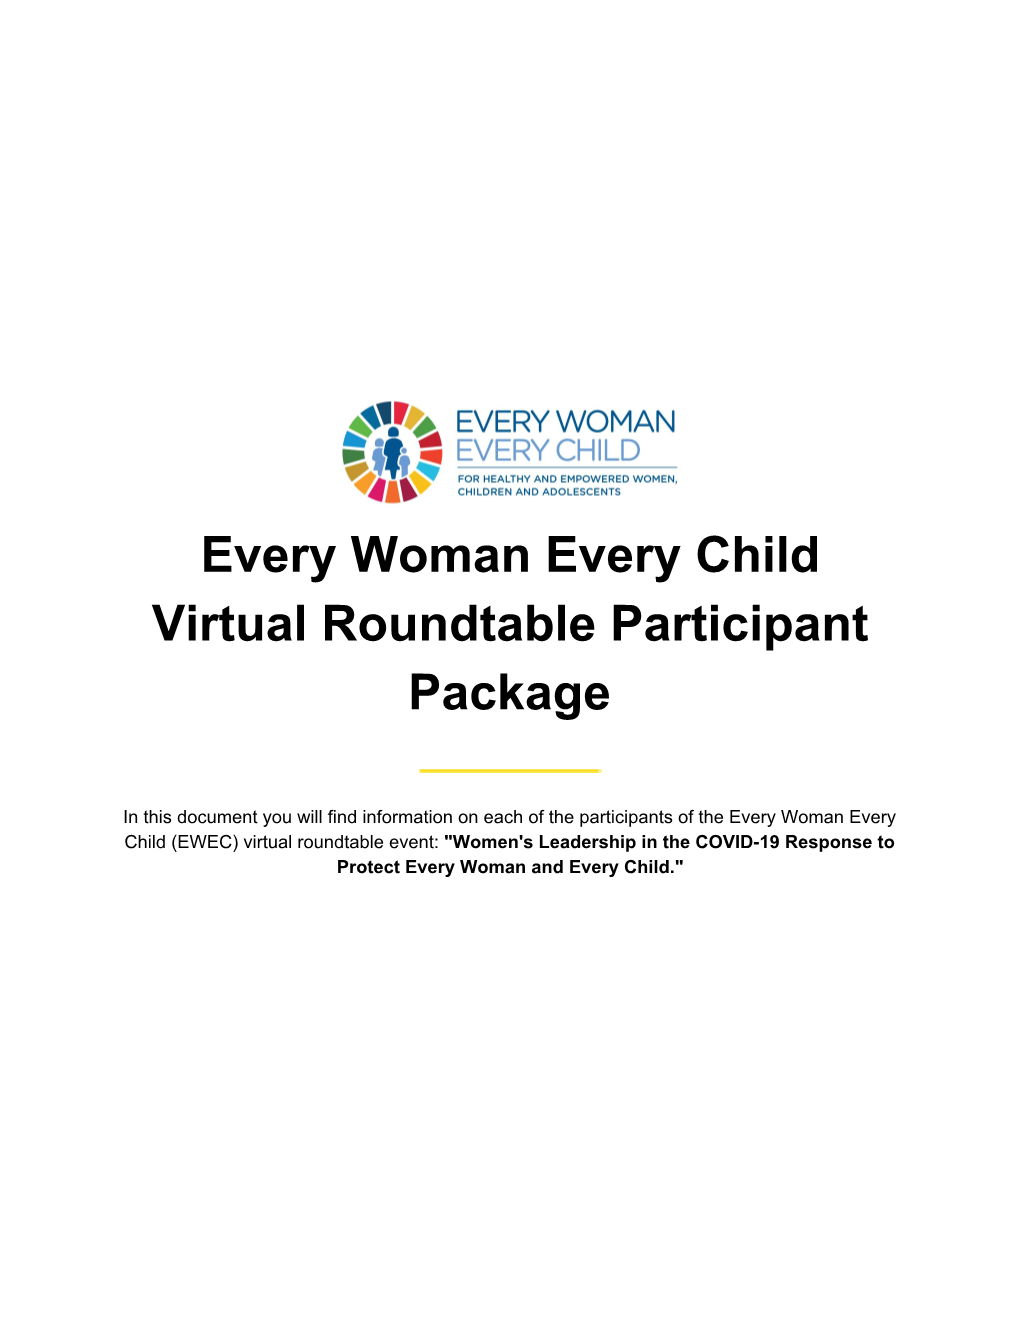 Every Woman Every Child Virtual Roundtable Participant Package